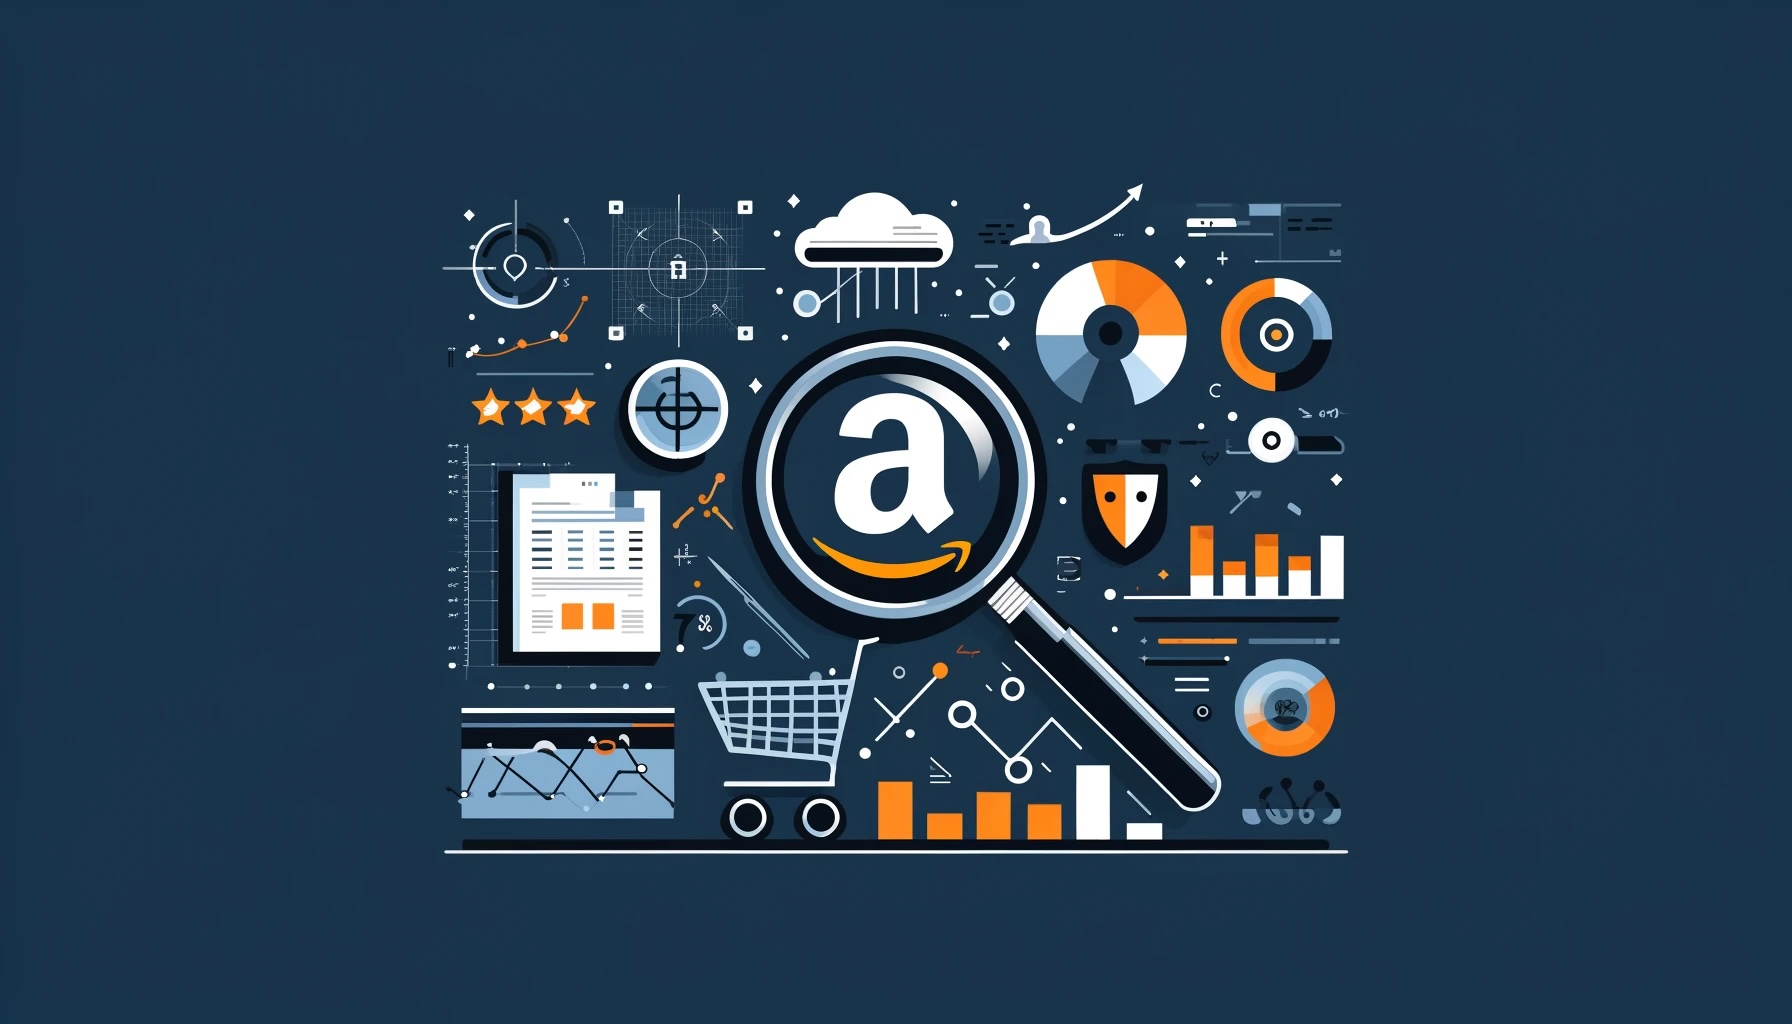 An infographic style image showing Amazon's a logo surrounded by ecommerce icons such as shopping carts and graphs